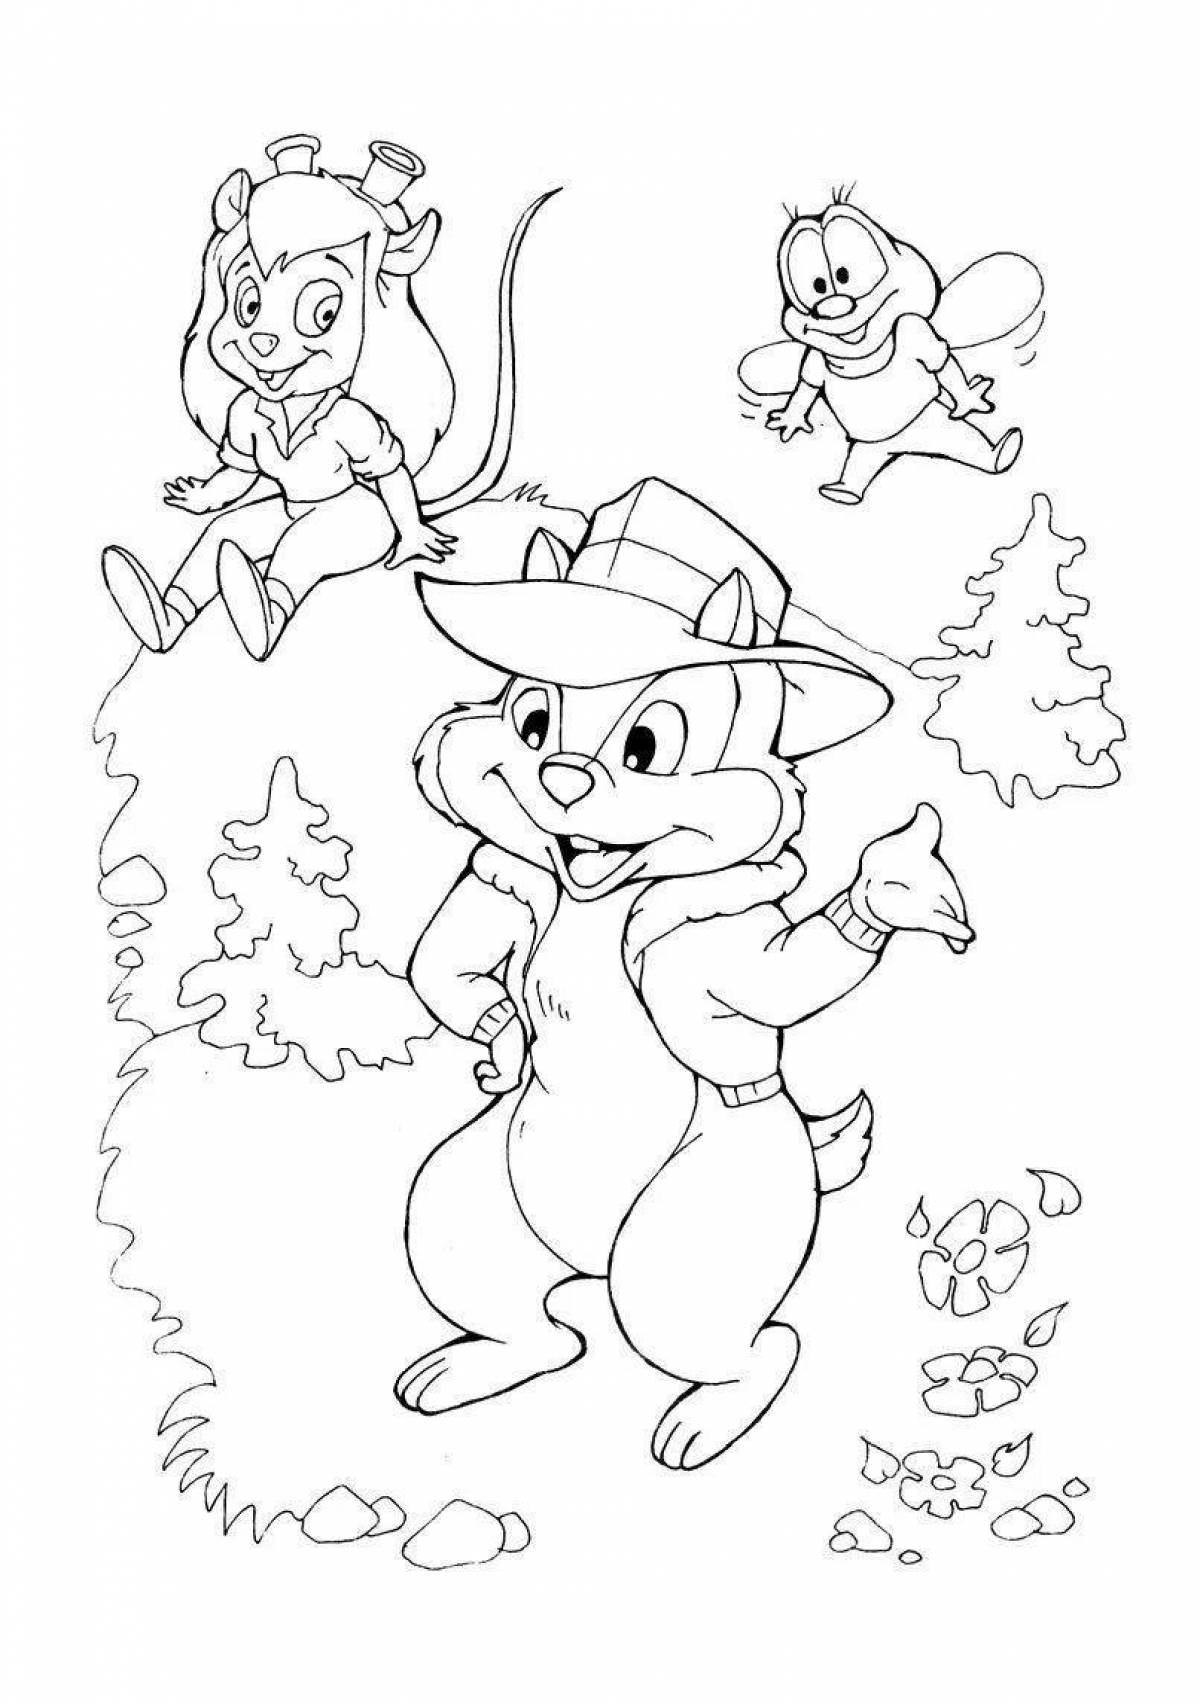 Chip and dale invitation coloring book